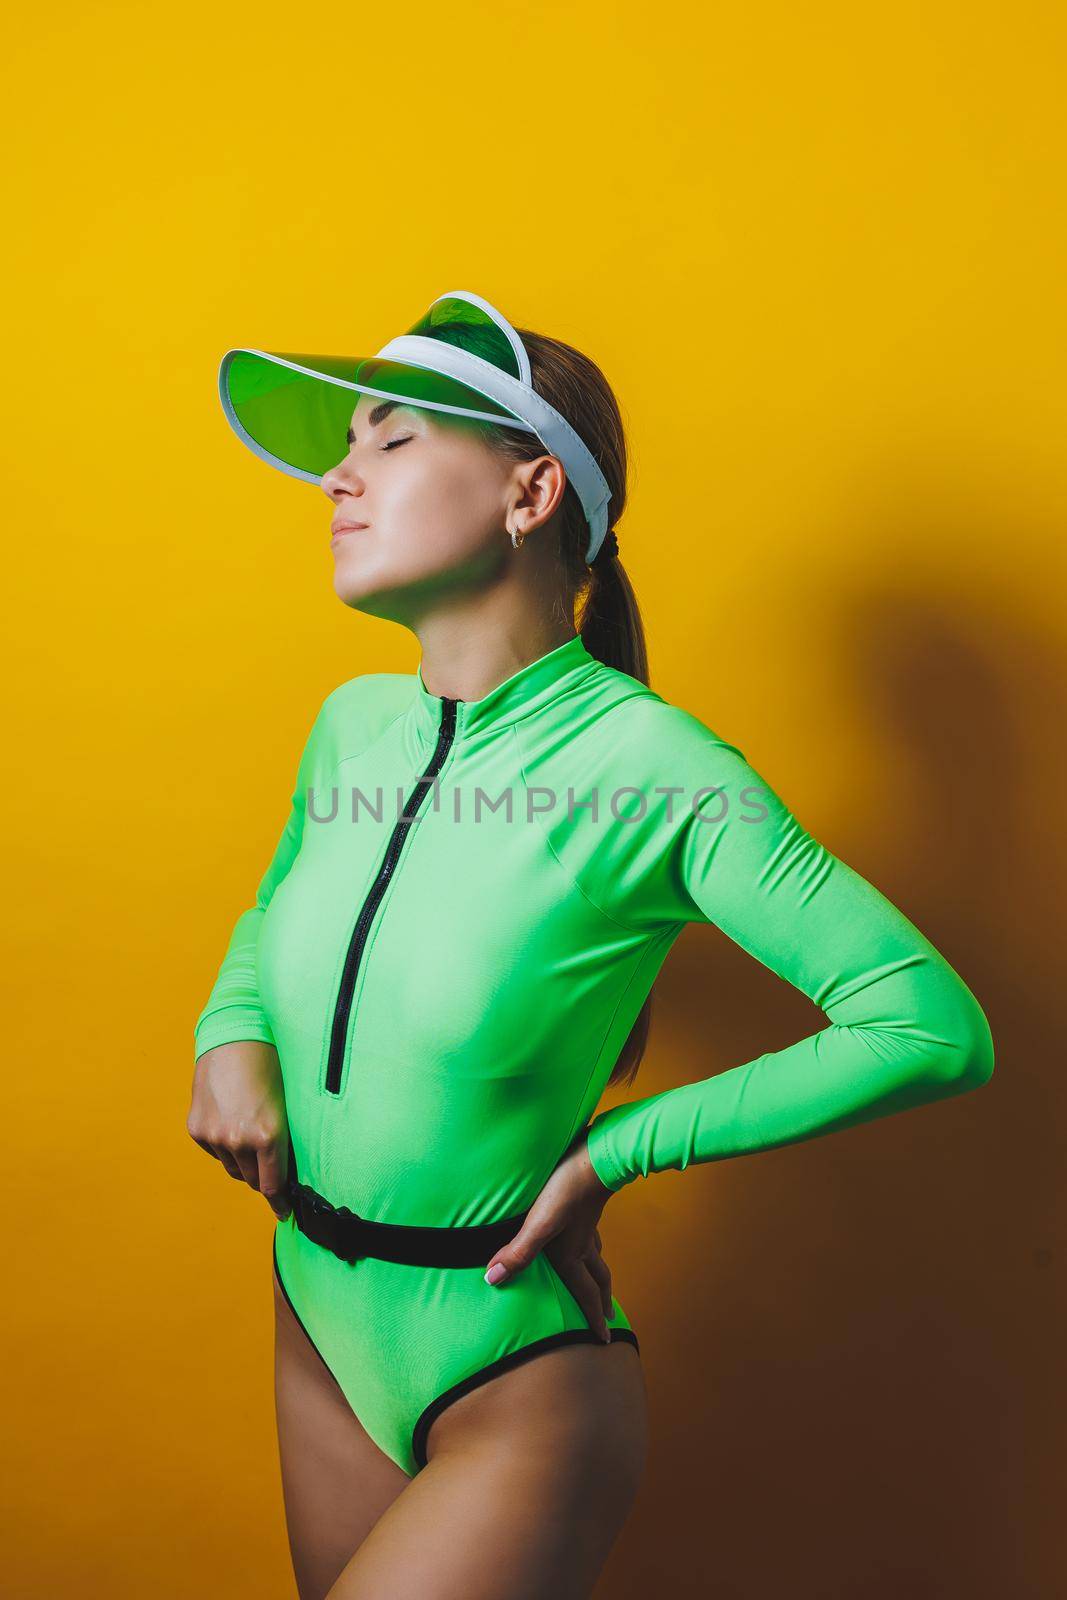 Attractive woman in bright green beach swimsuit, hat, on bright yellow background with perfect body. Isolated. Studio shot.